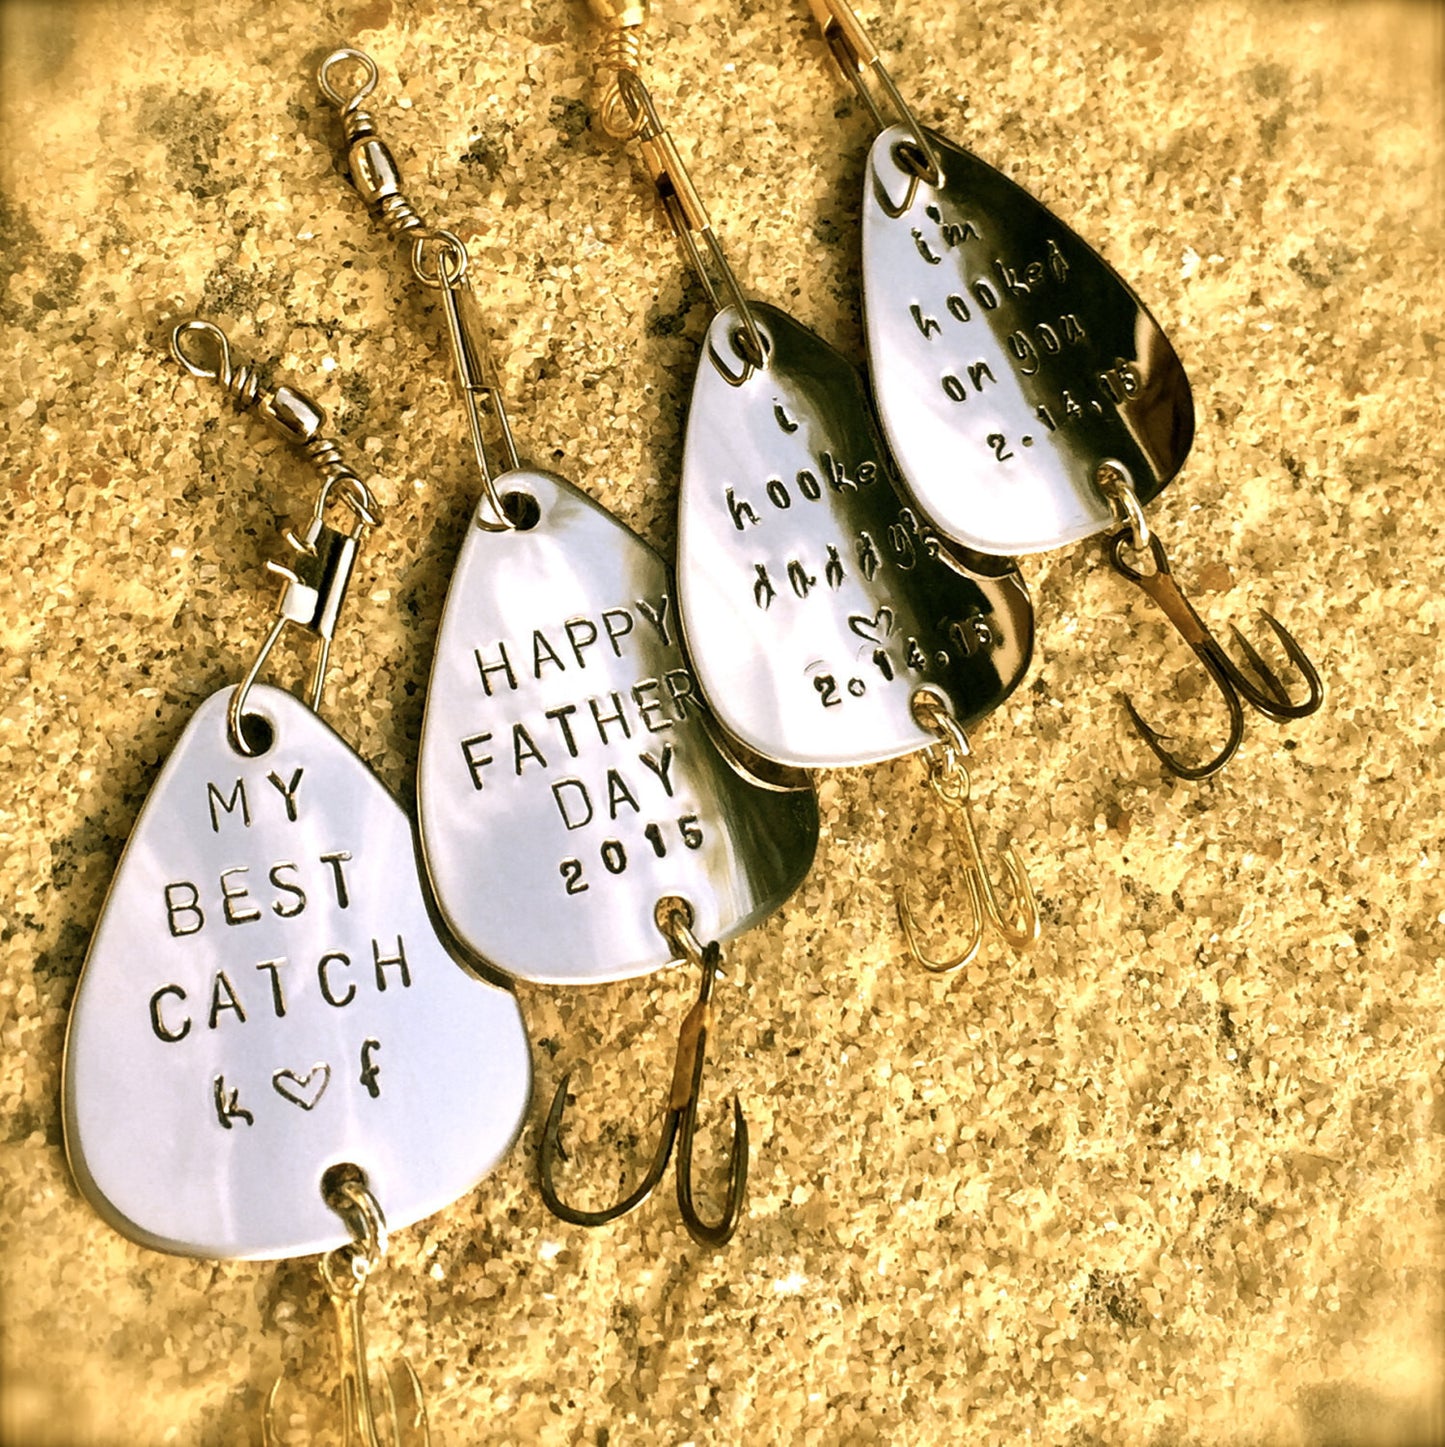 Fishing Lure,  Fathers Day Gift, For Him, Boyfriend Gift, Personalized Fishing Lure, Hand Stamped Fishing Lure,natashaaloha, Hooked Since - Natashaaloha, jewelry, bracelets, necklace, keychains, fishing lures, gifts for men, charms, personalized, 